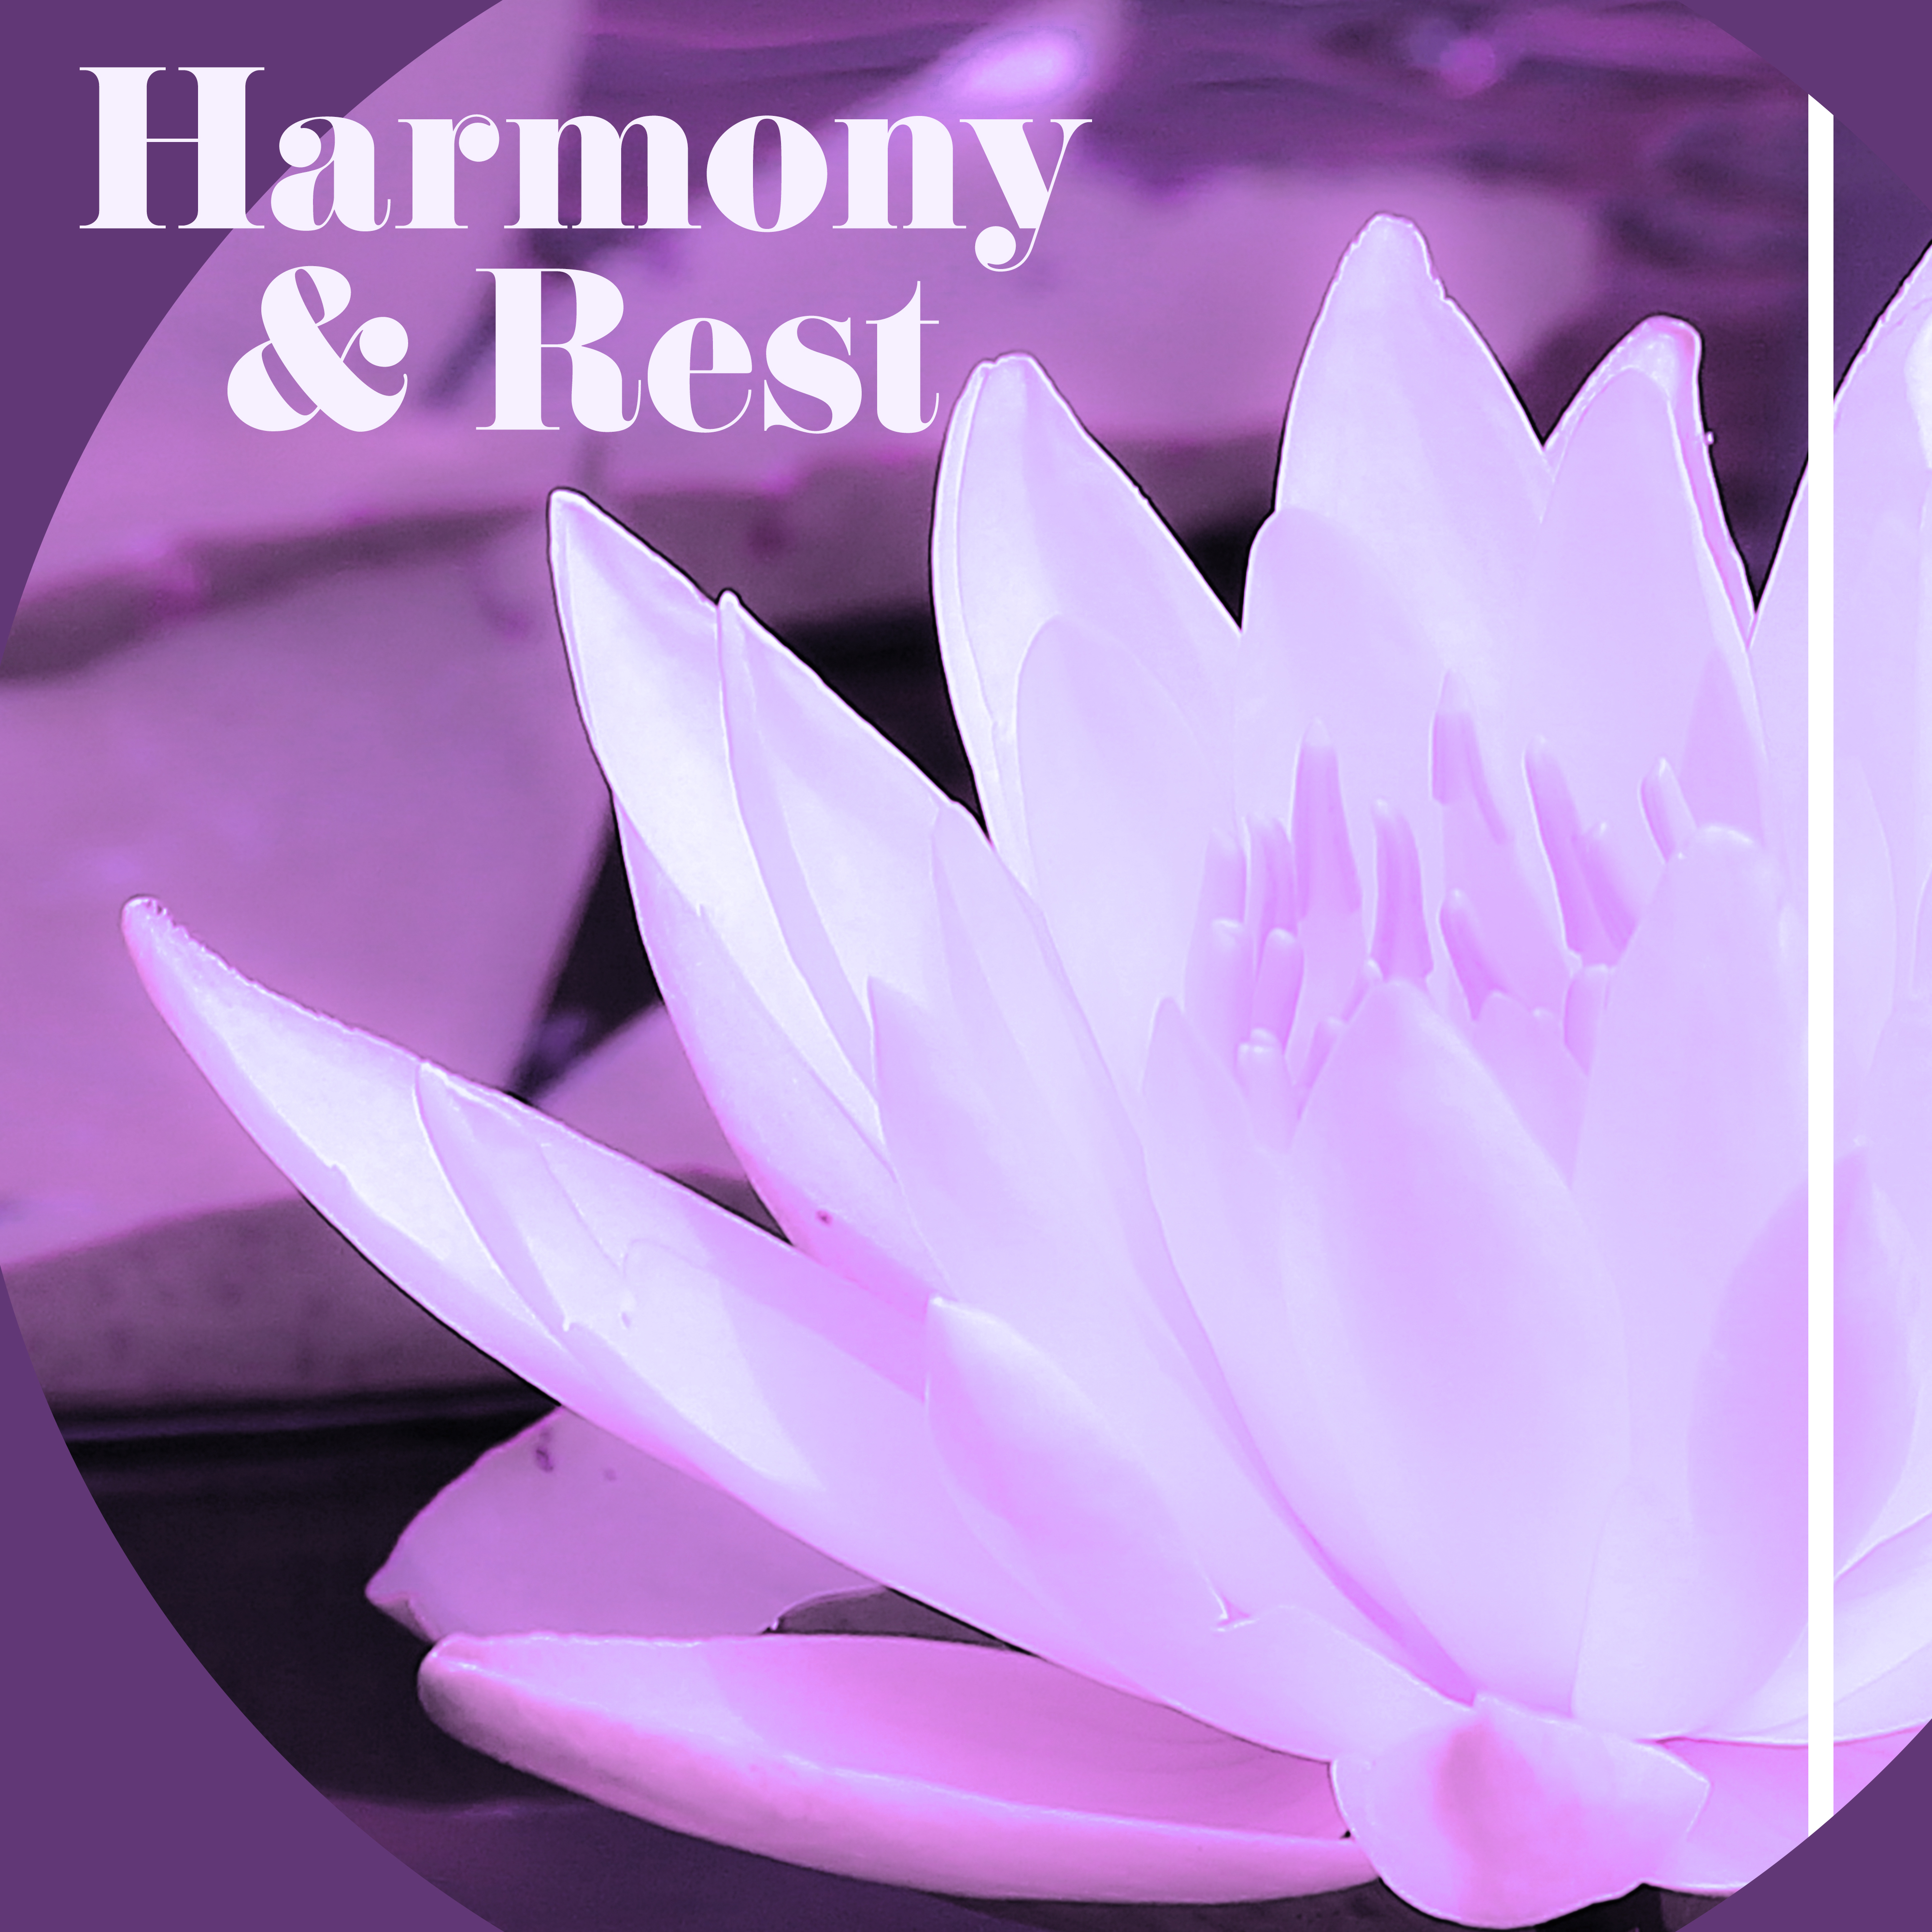 Harmony  Rest  Music for Yoga, Asian Meditation, Healing Sounds, Oriental Flute, Music Reduces Stress